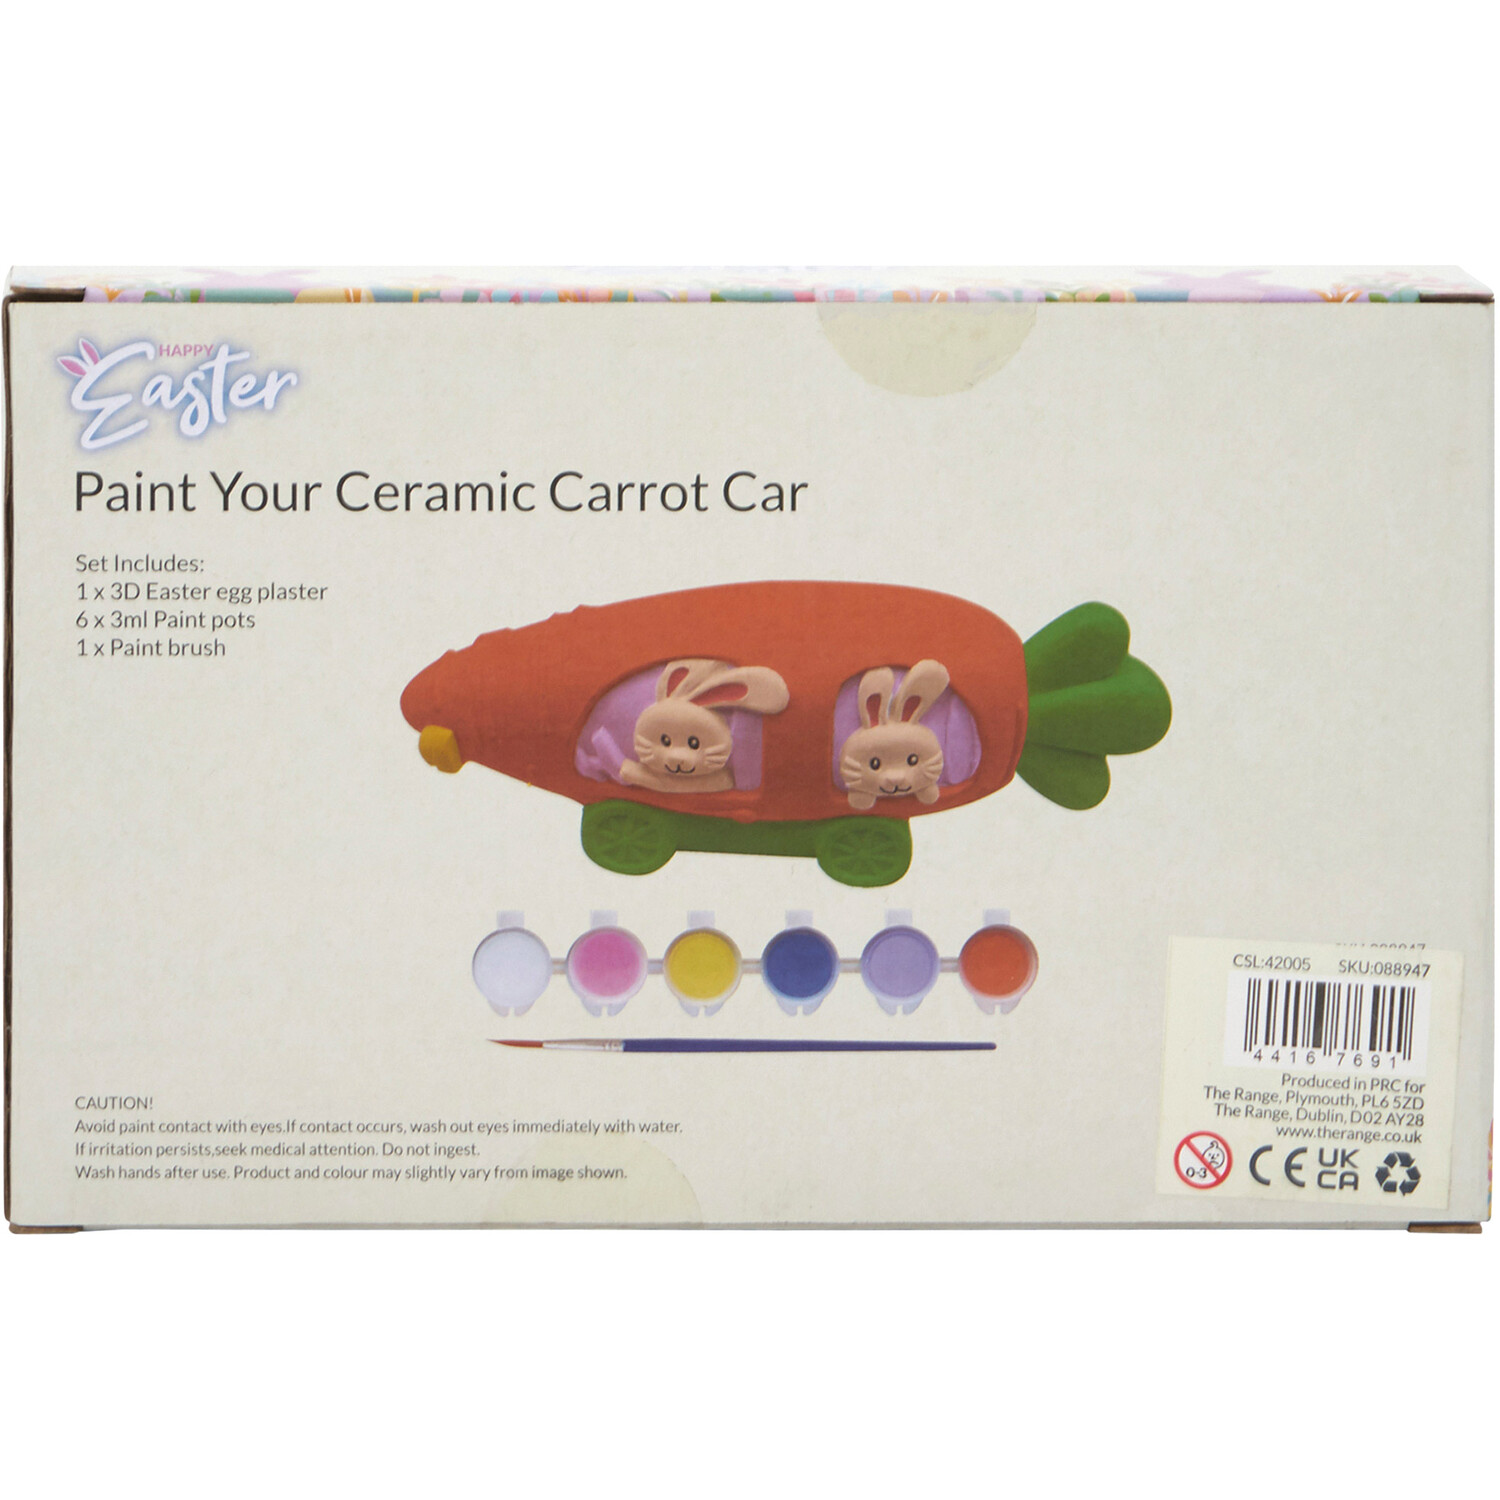 Paint Your Own Ceramic Carrot Car Image 2